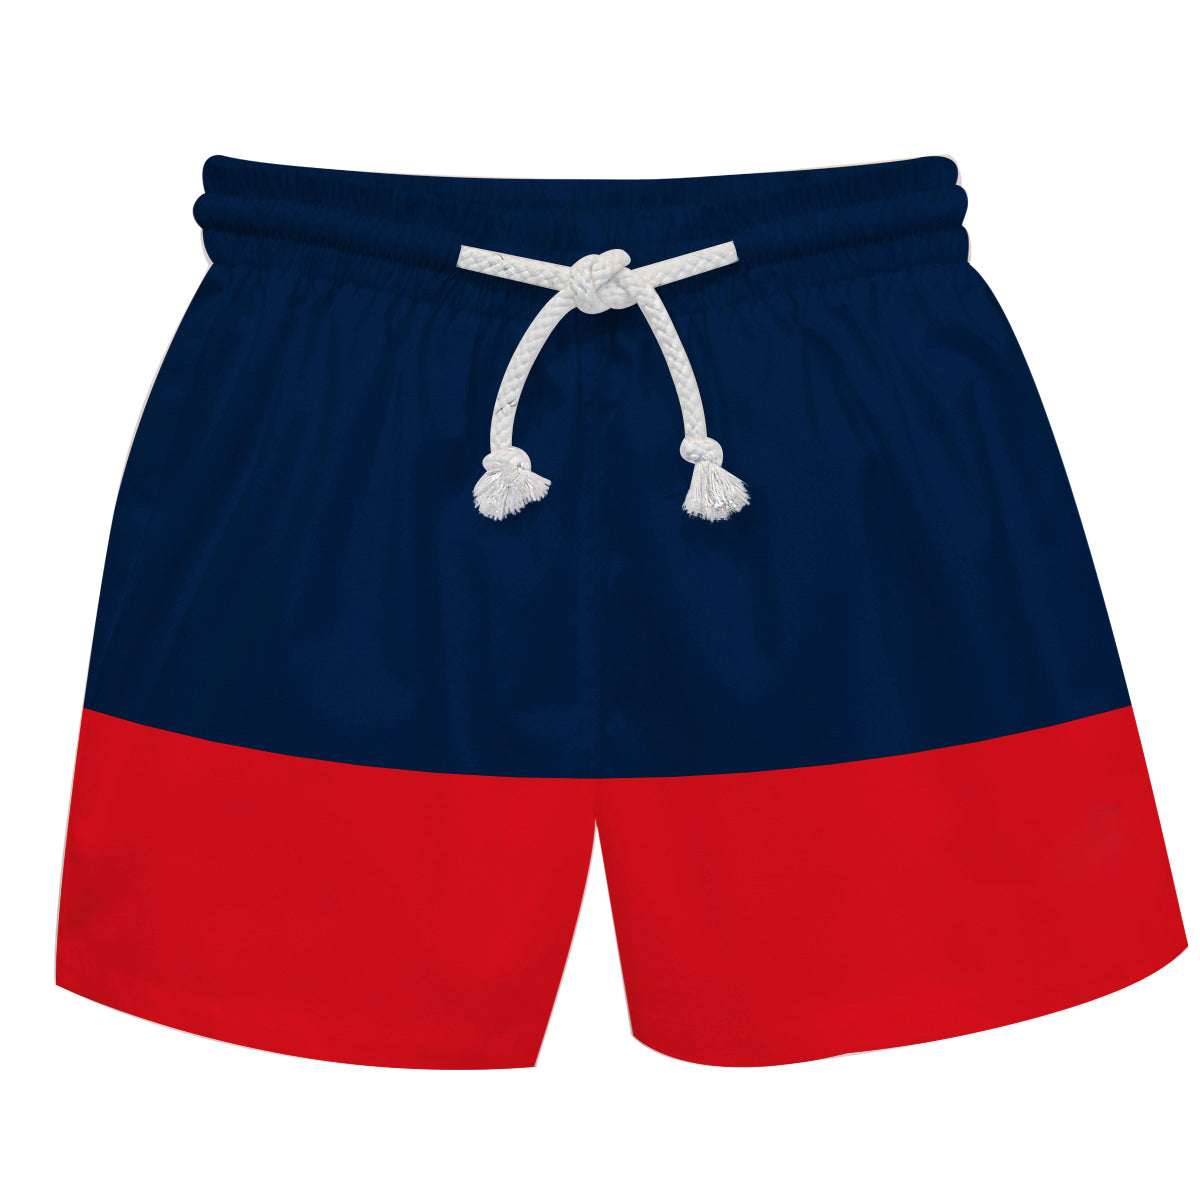 Monogram Navy and Red Swimtrunk - Wimziy&Co.